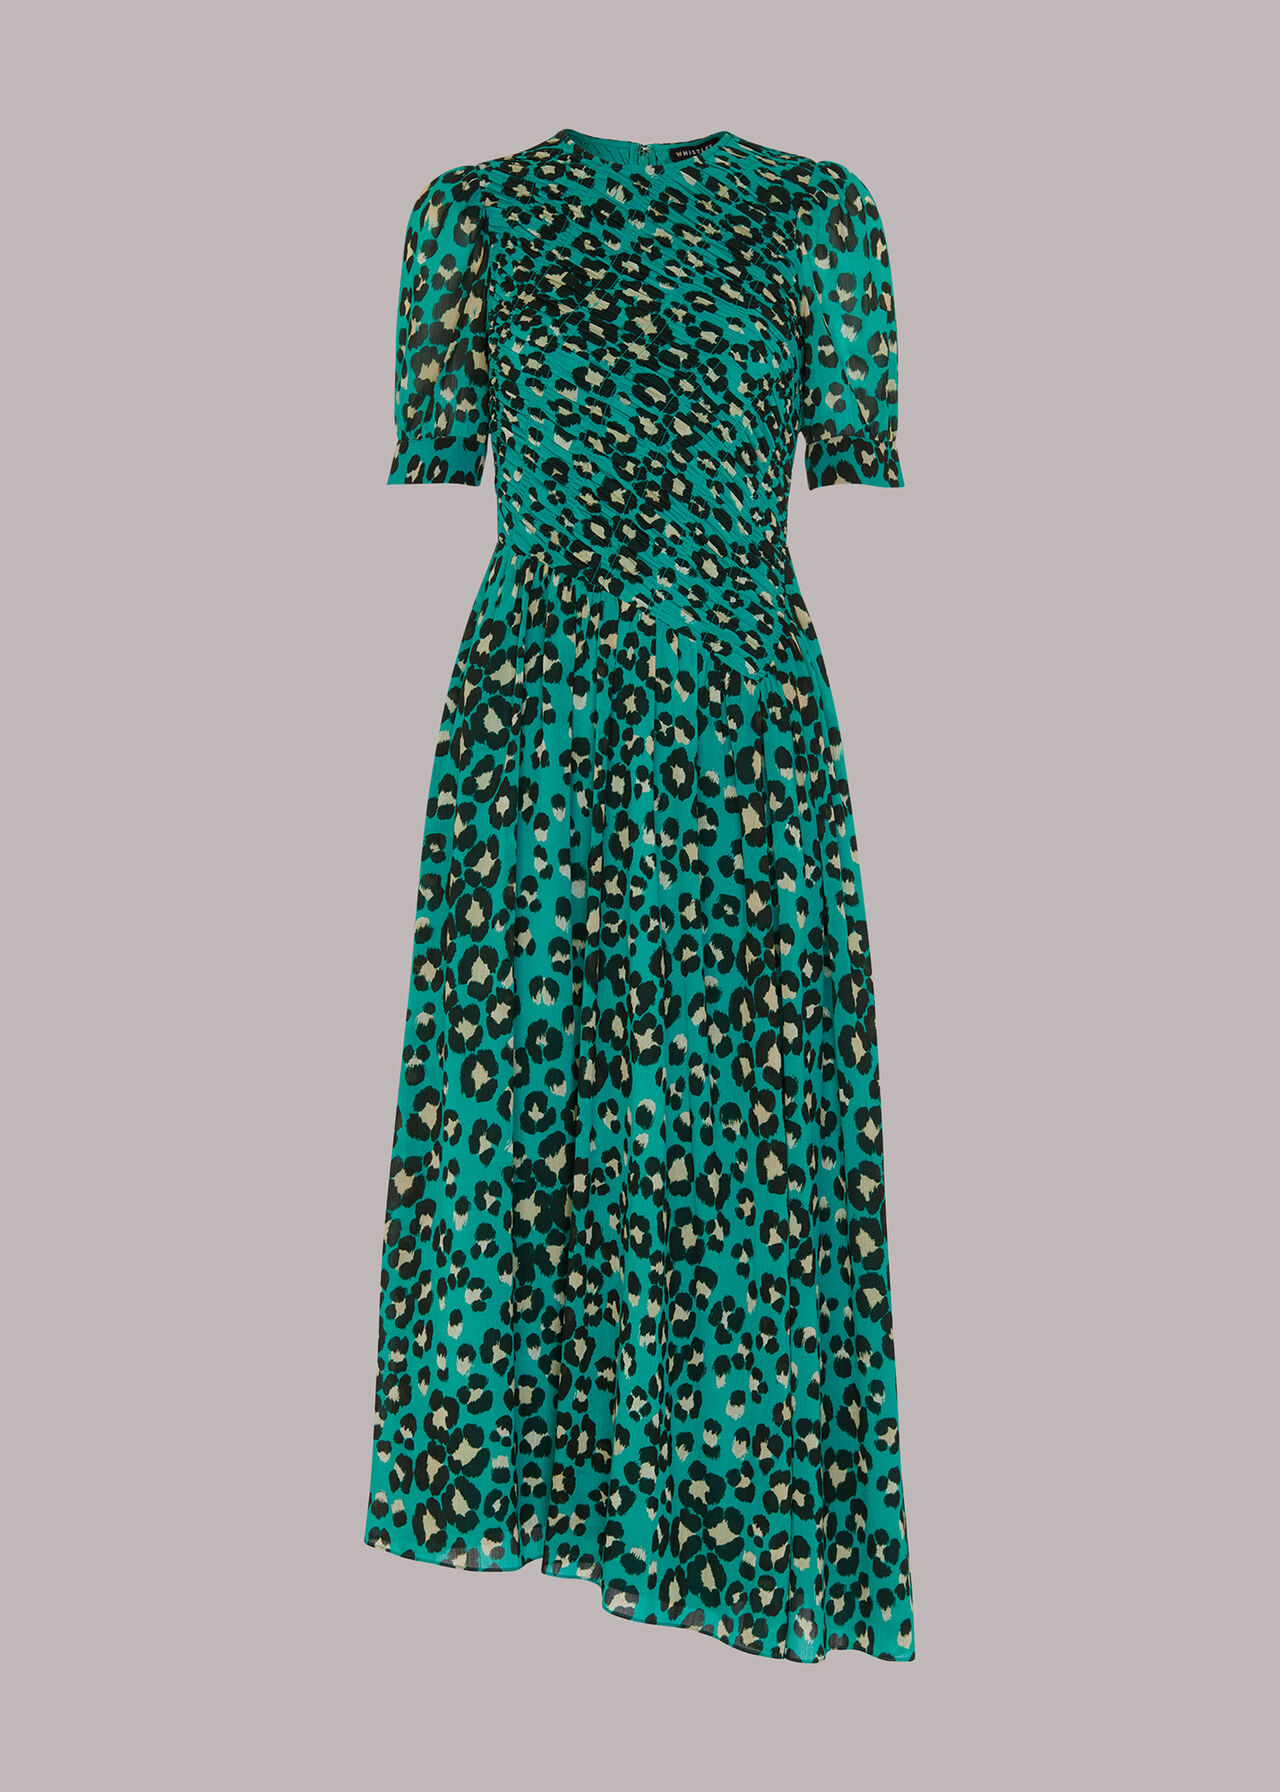 Painted Leopard Shirred Dress